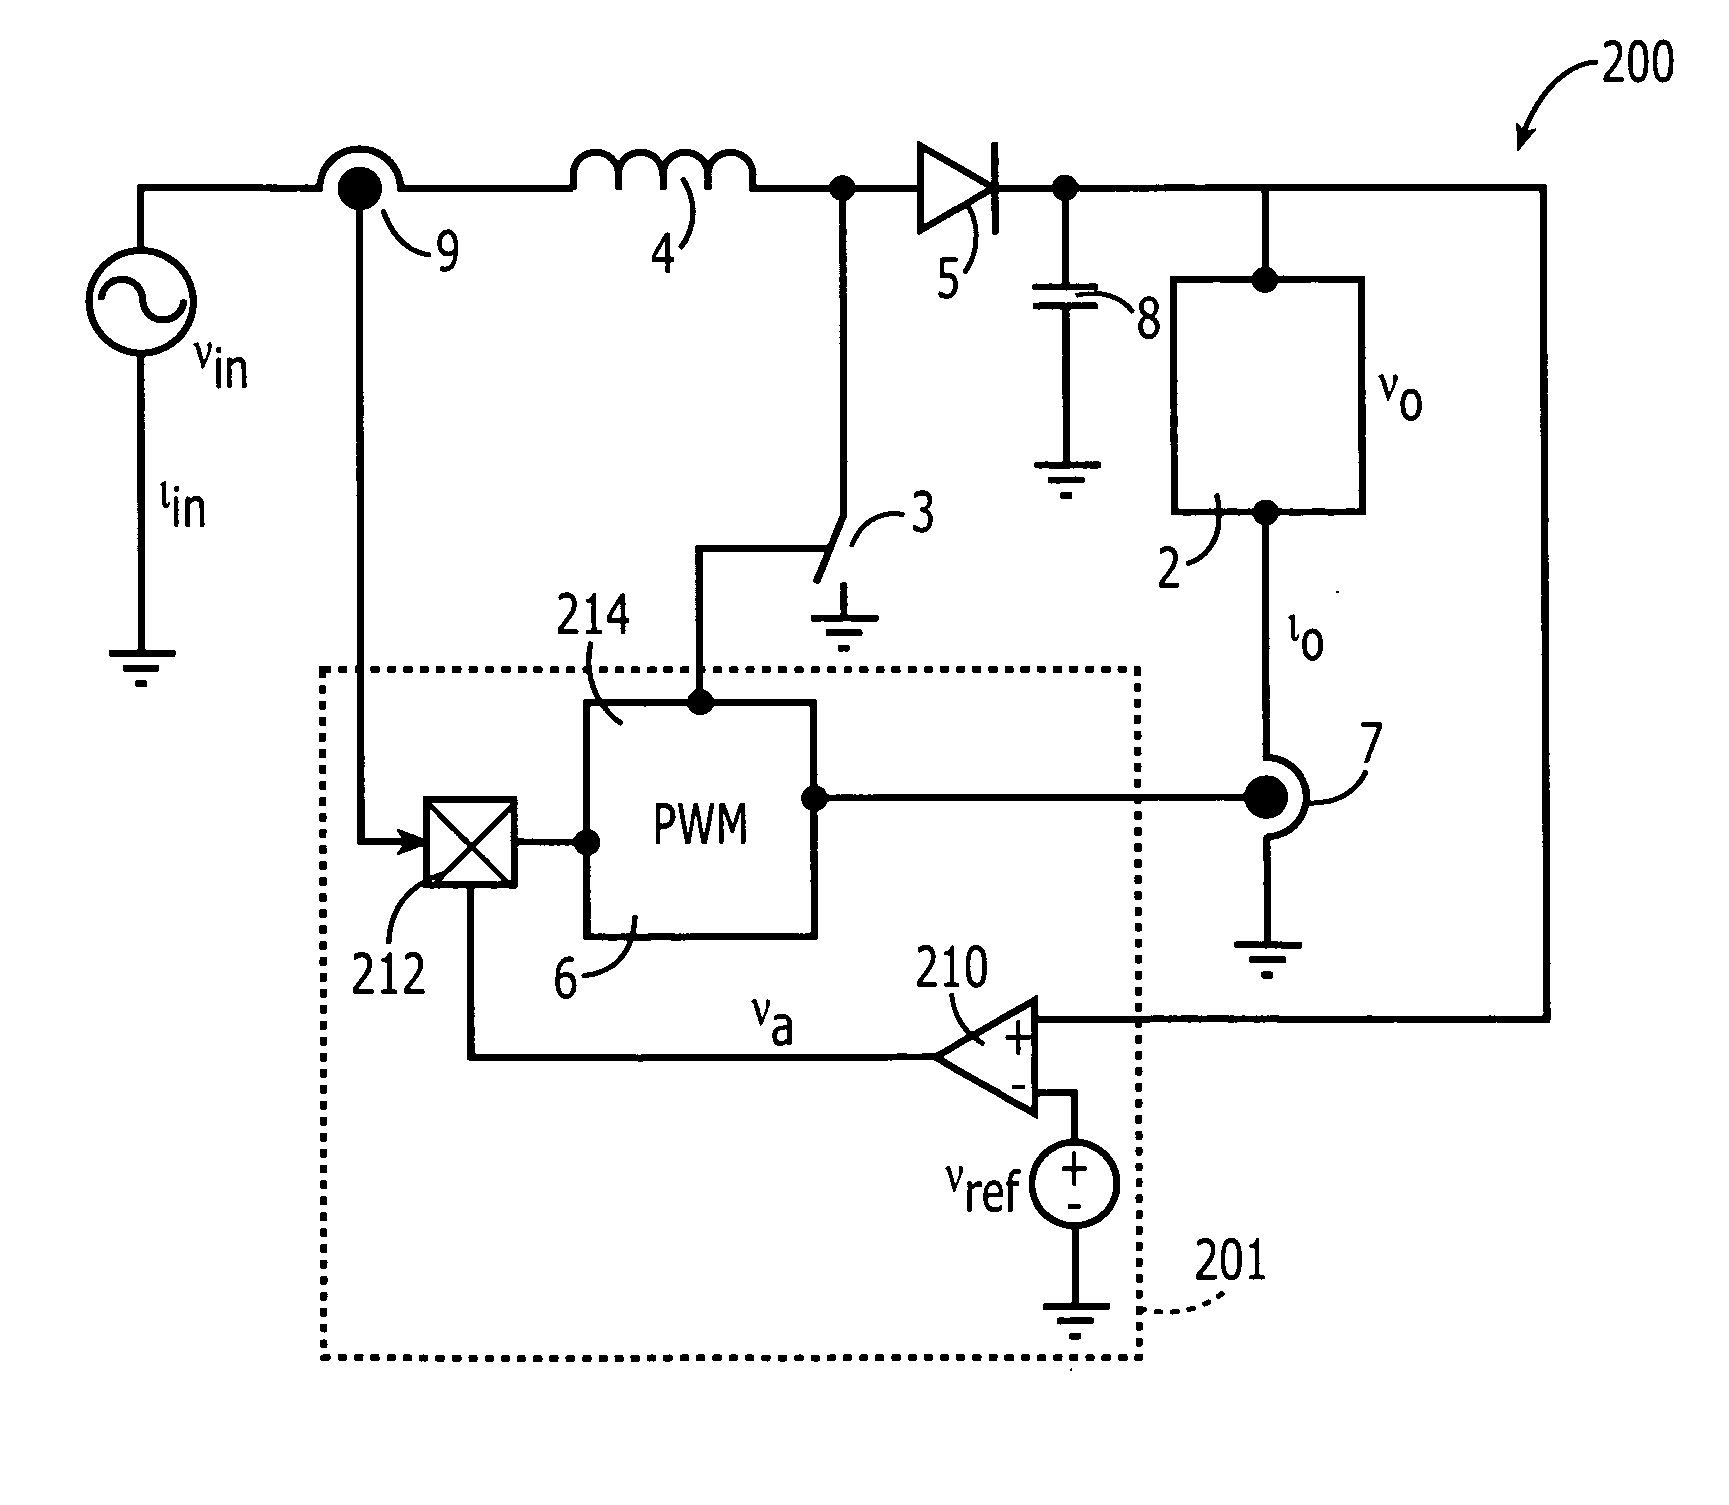 Power converter apparatus and methods using output current feedforward control